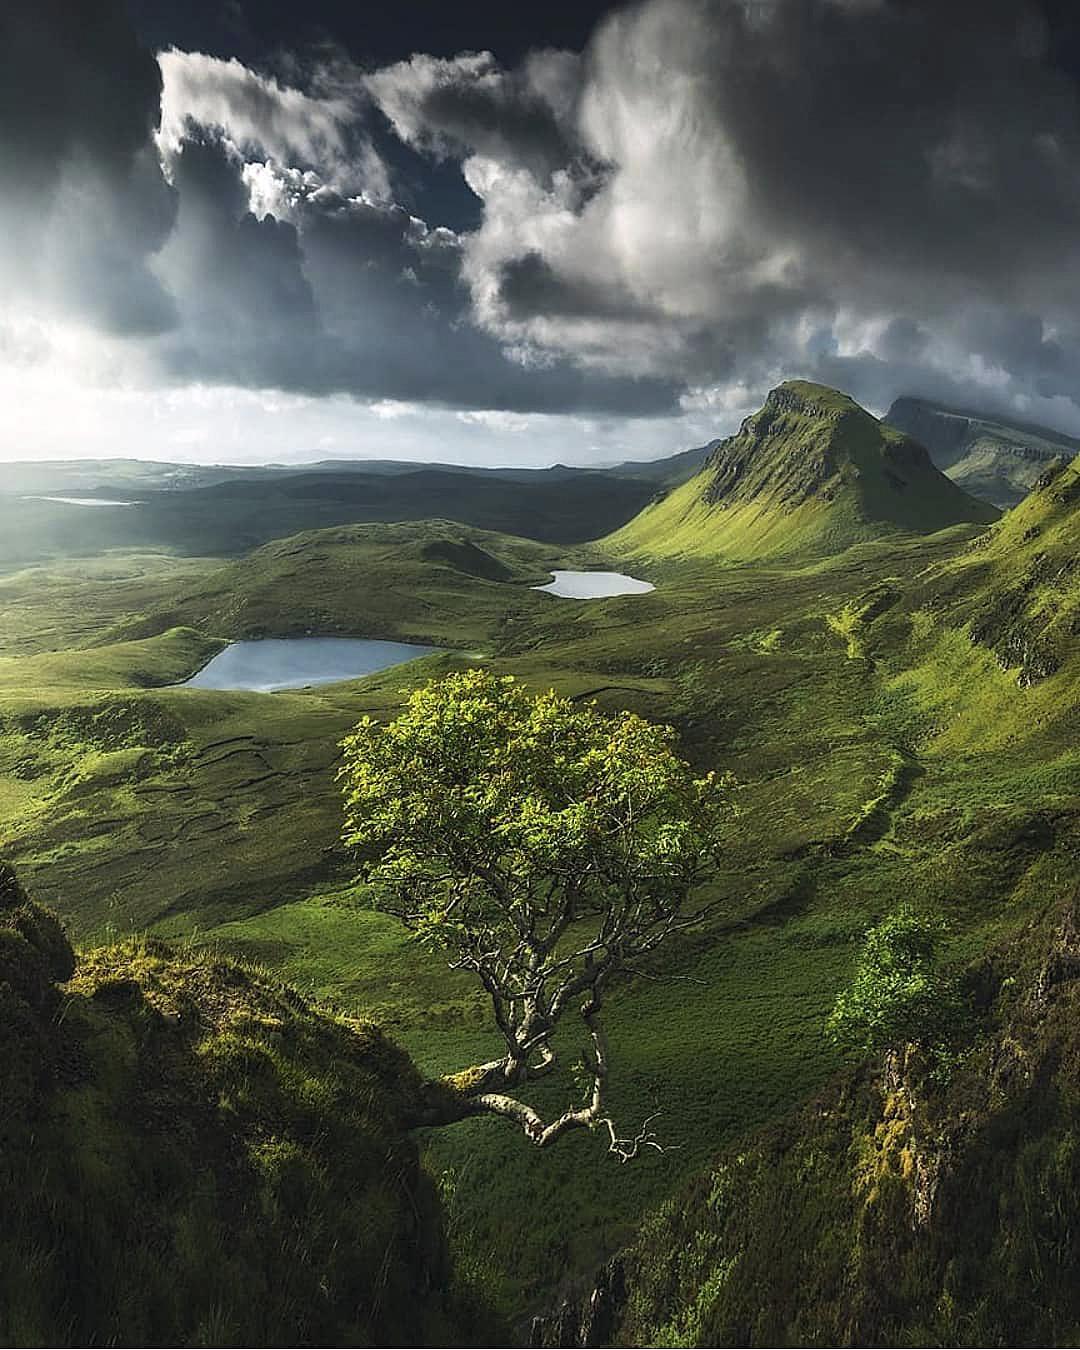 Tree growing from the side of a cliff in the Scottish Highlands, Isle of Skye